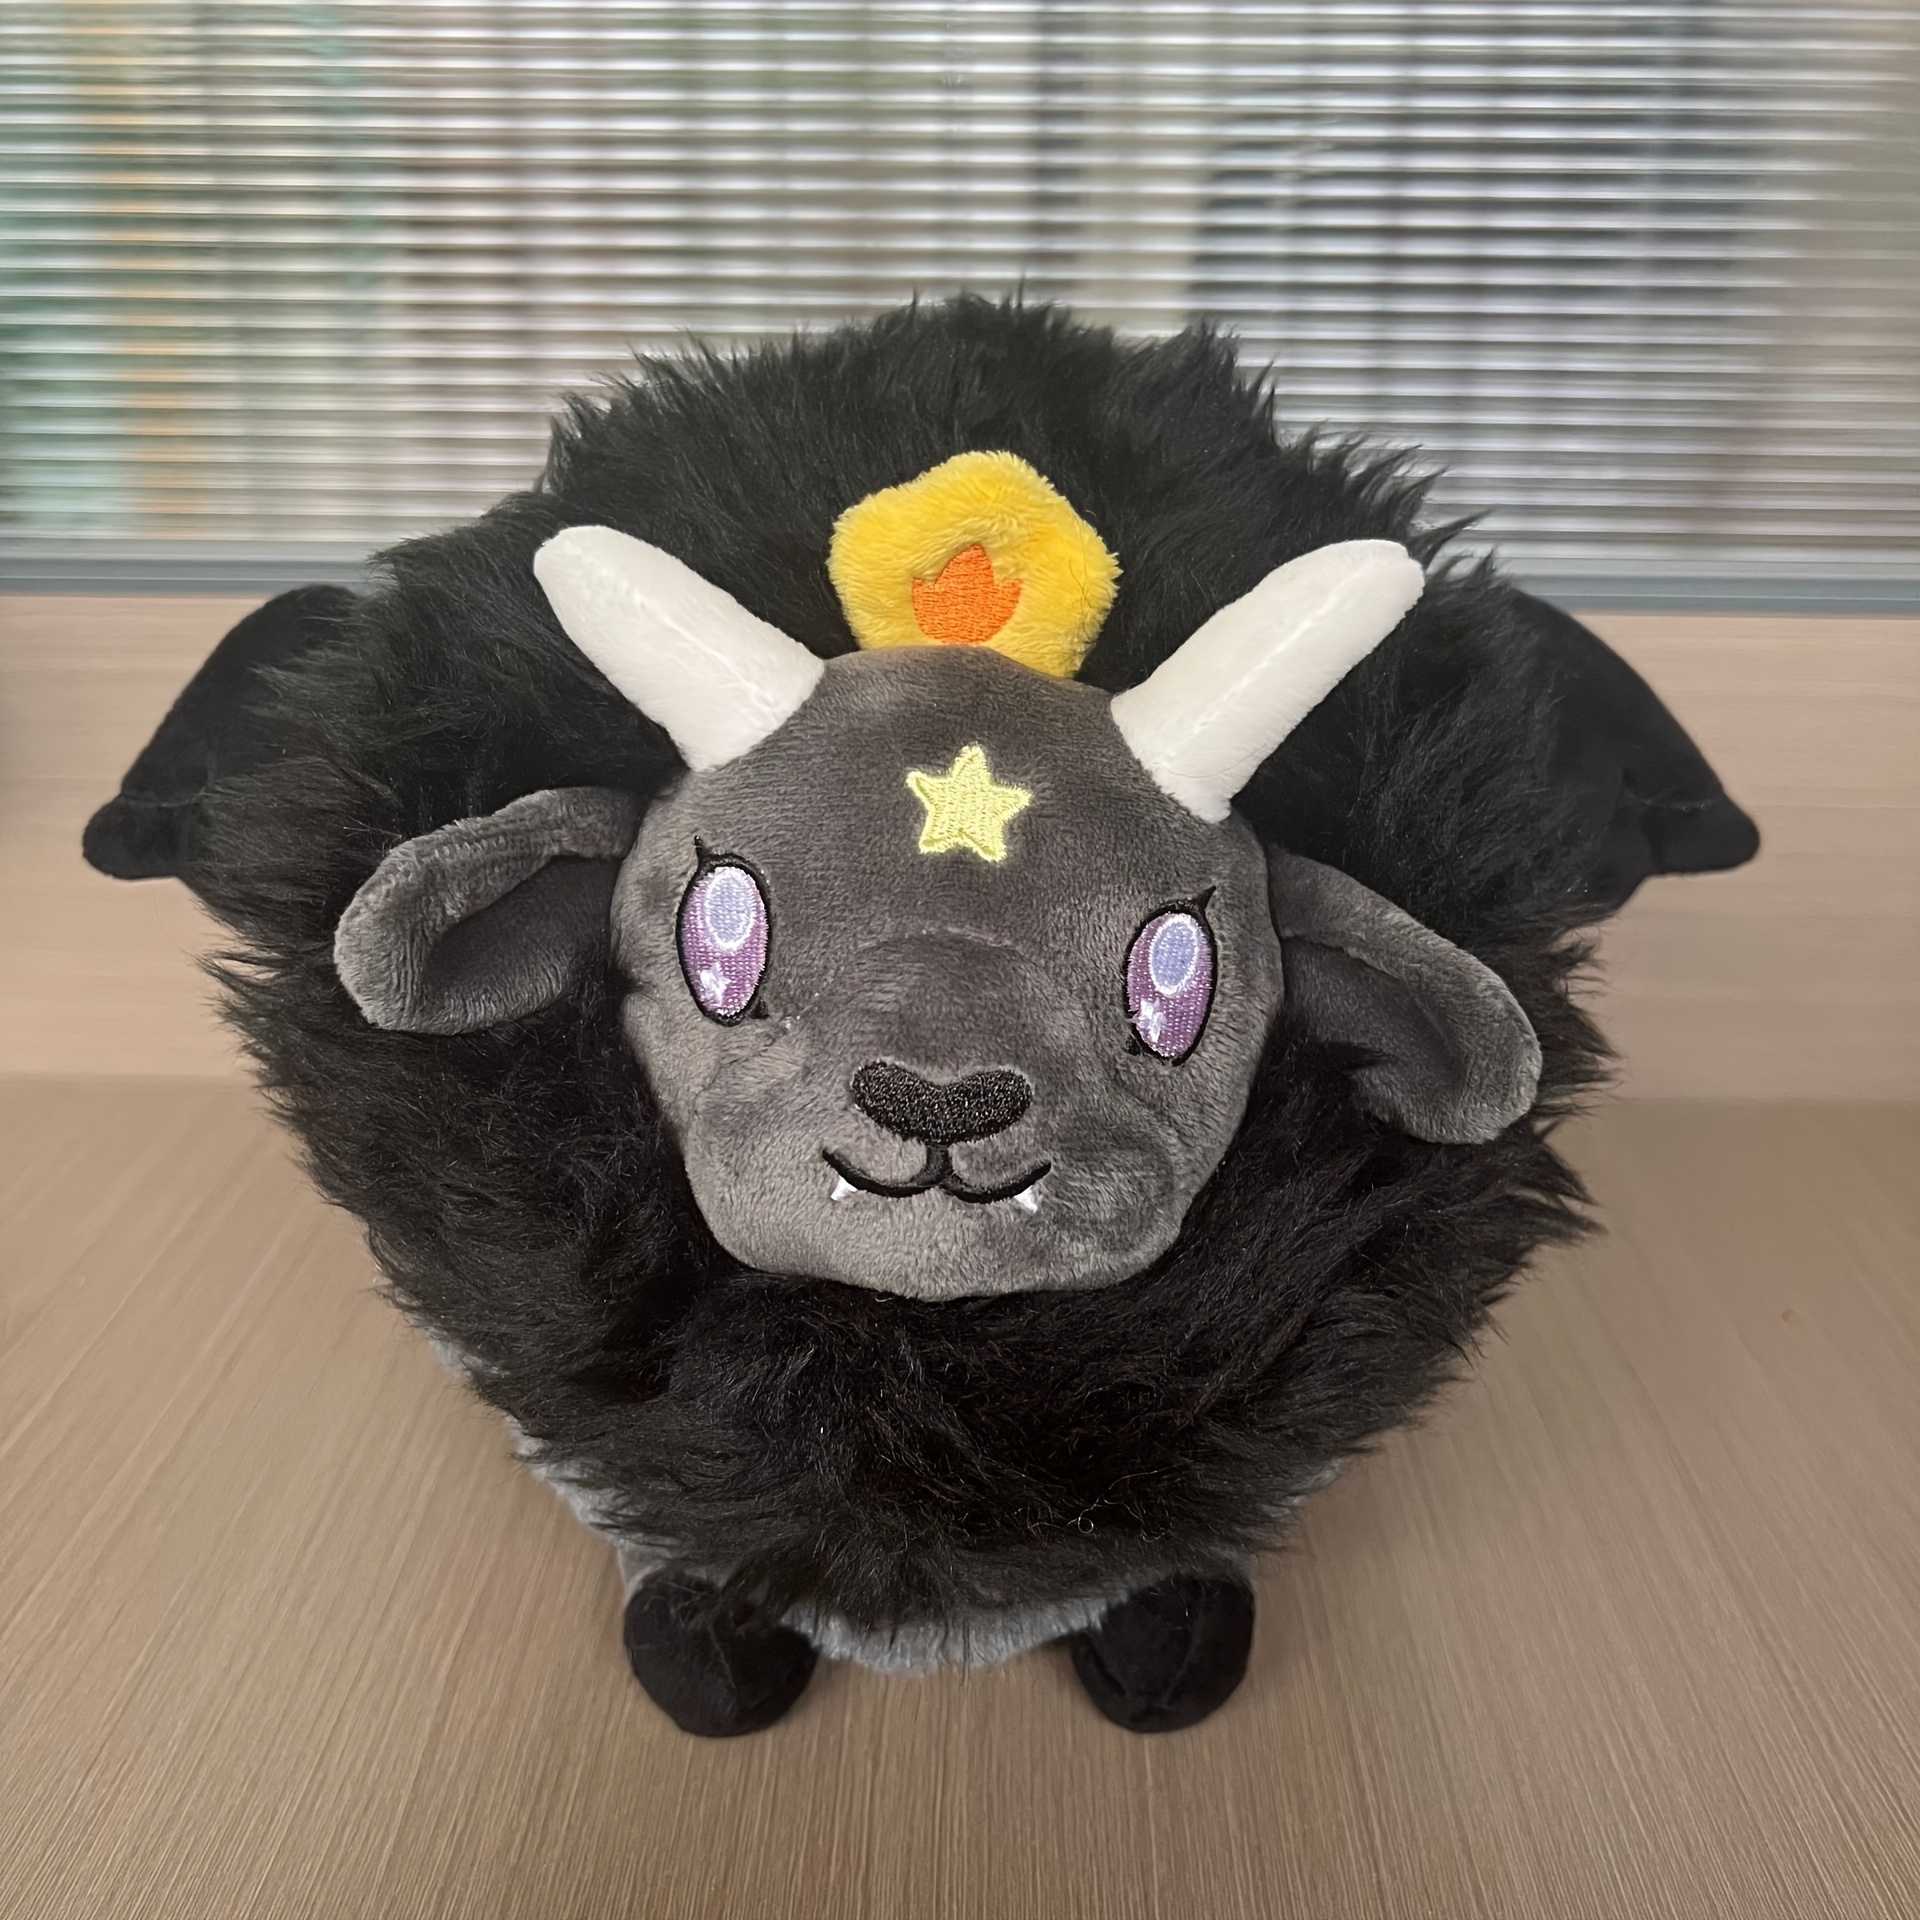 

Black Sheep Plush Toy With Baphomet Crown - Soft Synthetic Fiber Stuffed Animal, Perfect Gift For Youngsters 0-3 Years, Ideal For Christmas & Halloween Room Decor